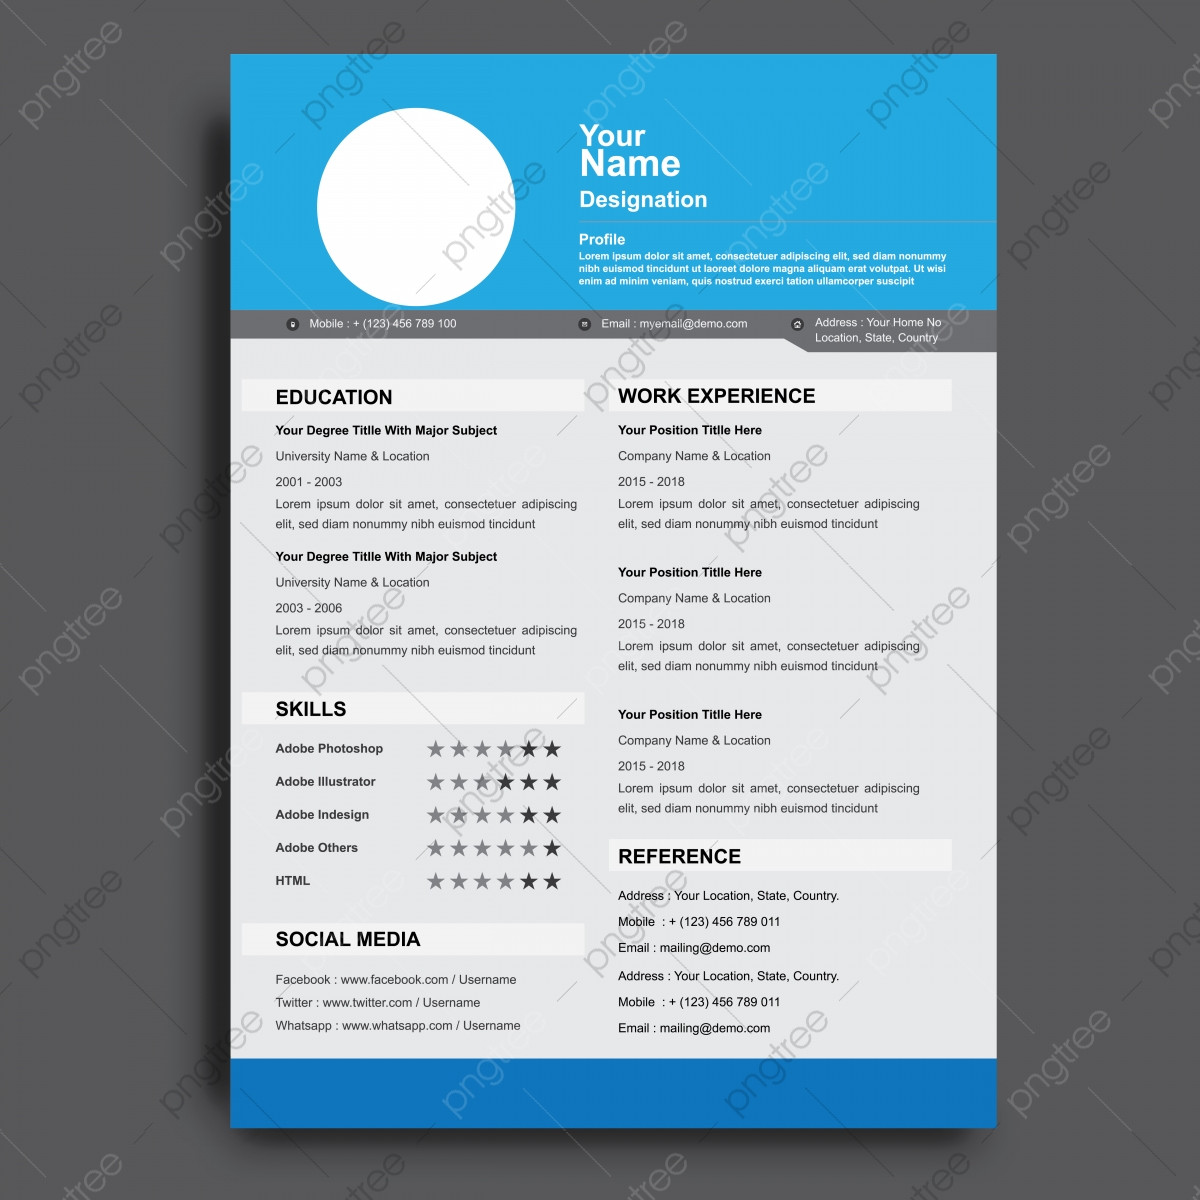 Free Resume Templates 2022 with Photo Best Resume Templates Free 2022 Word Download Builder Template …